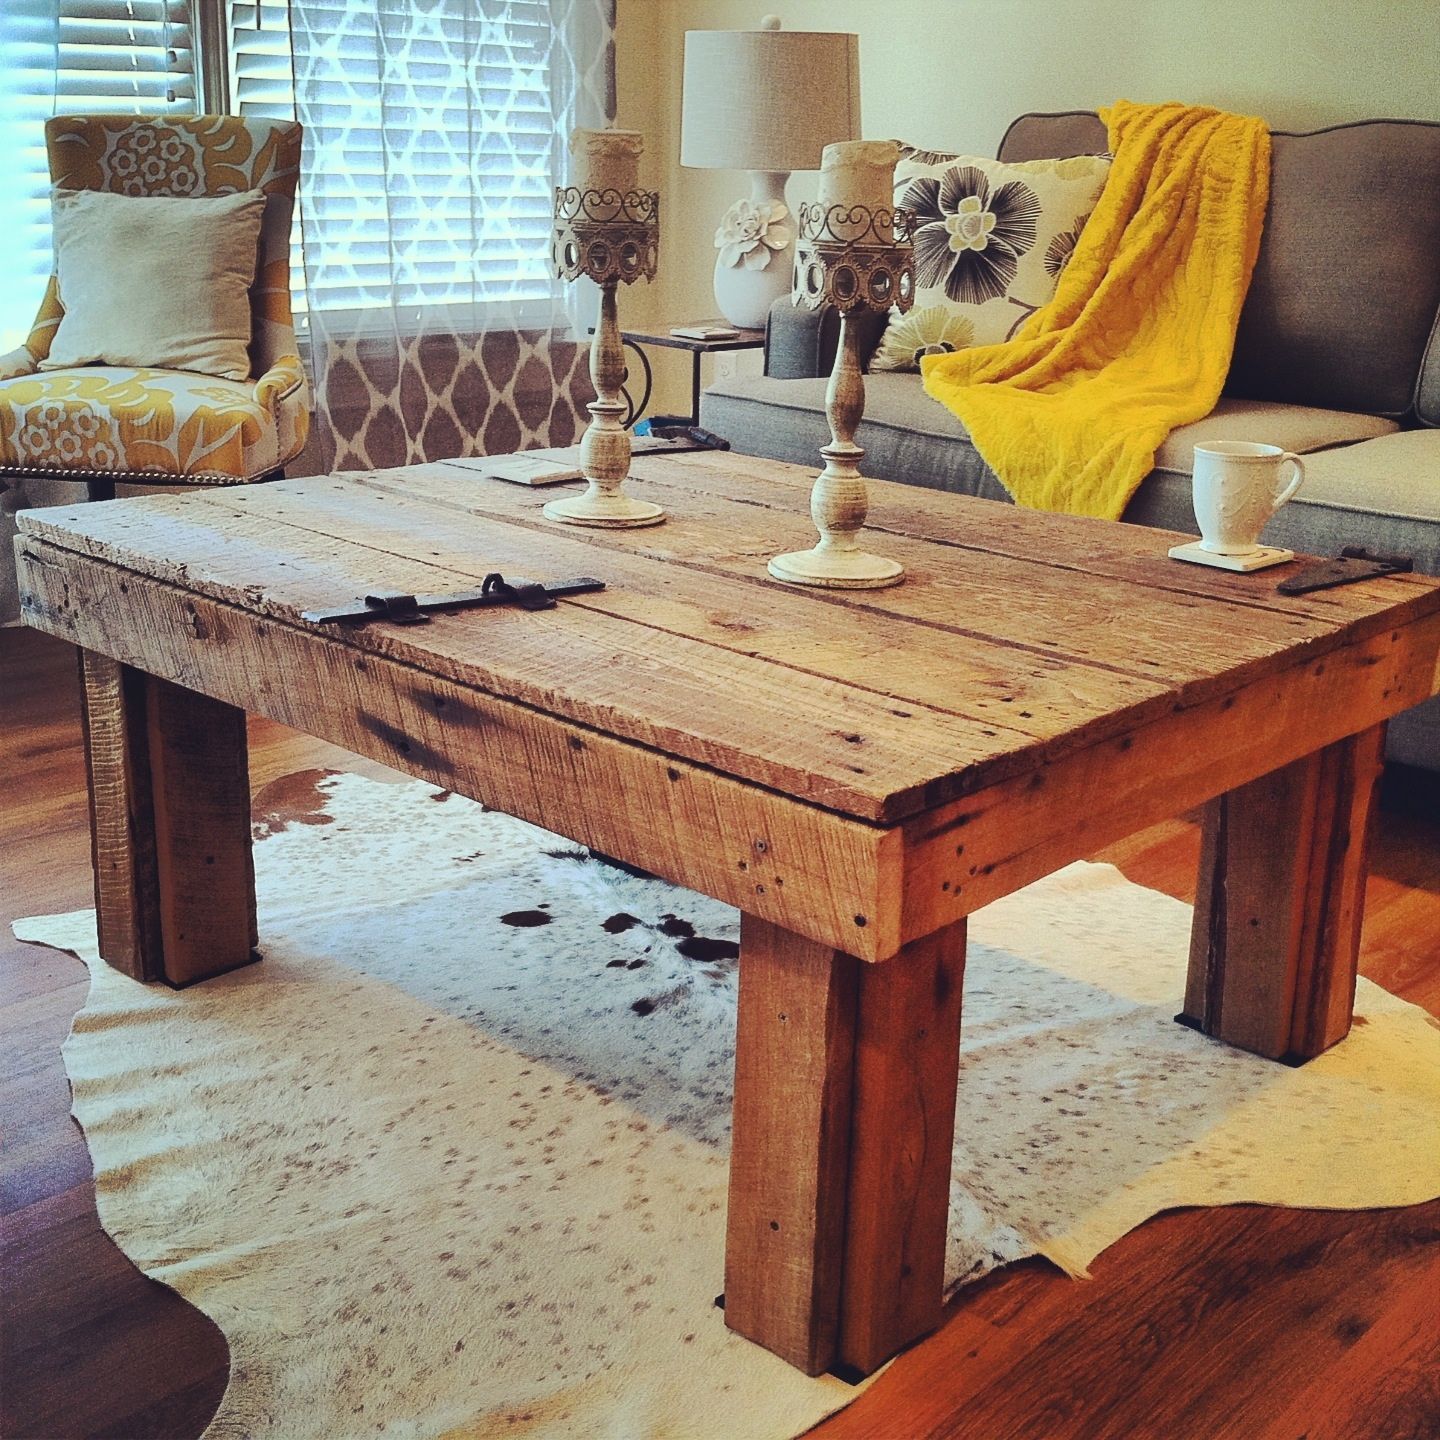 Barn Door Coffee Table Diy – Coffee Table Design Ideas Intended For Coffee Tables With Sliding Barn Doors (View 19 of 20)